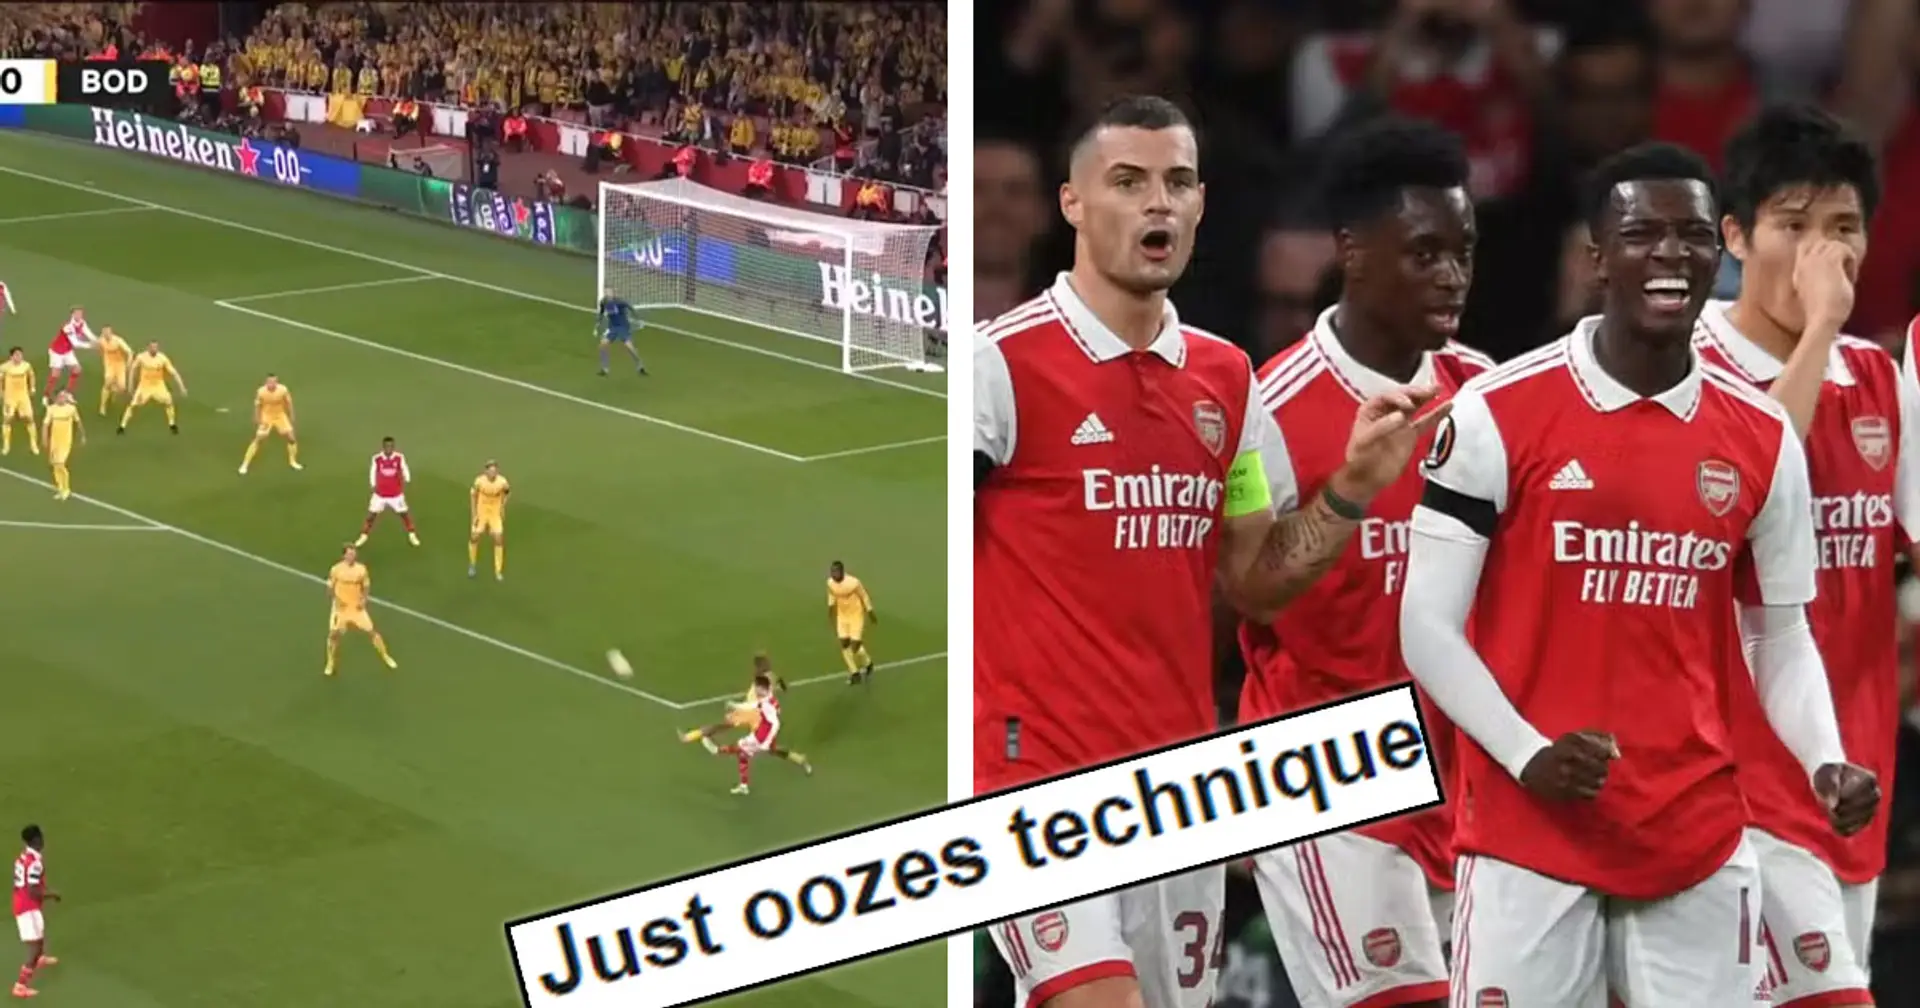 'He has that decisiveness': Arsenal fans name standout performer from Bodo/Glimt win – not Nketiah